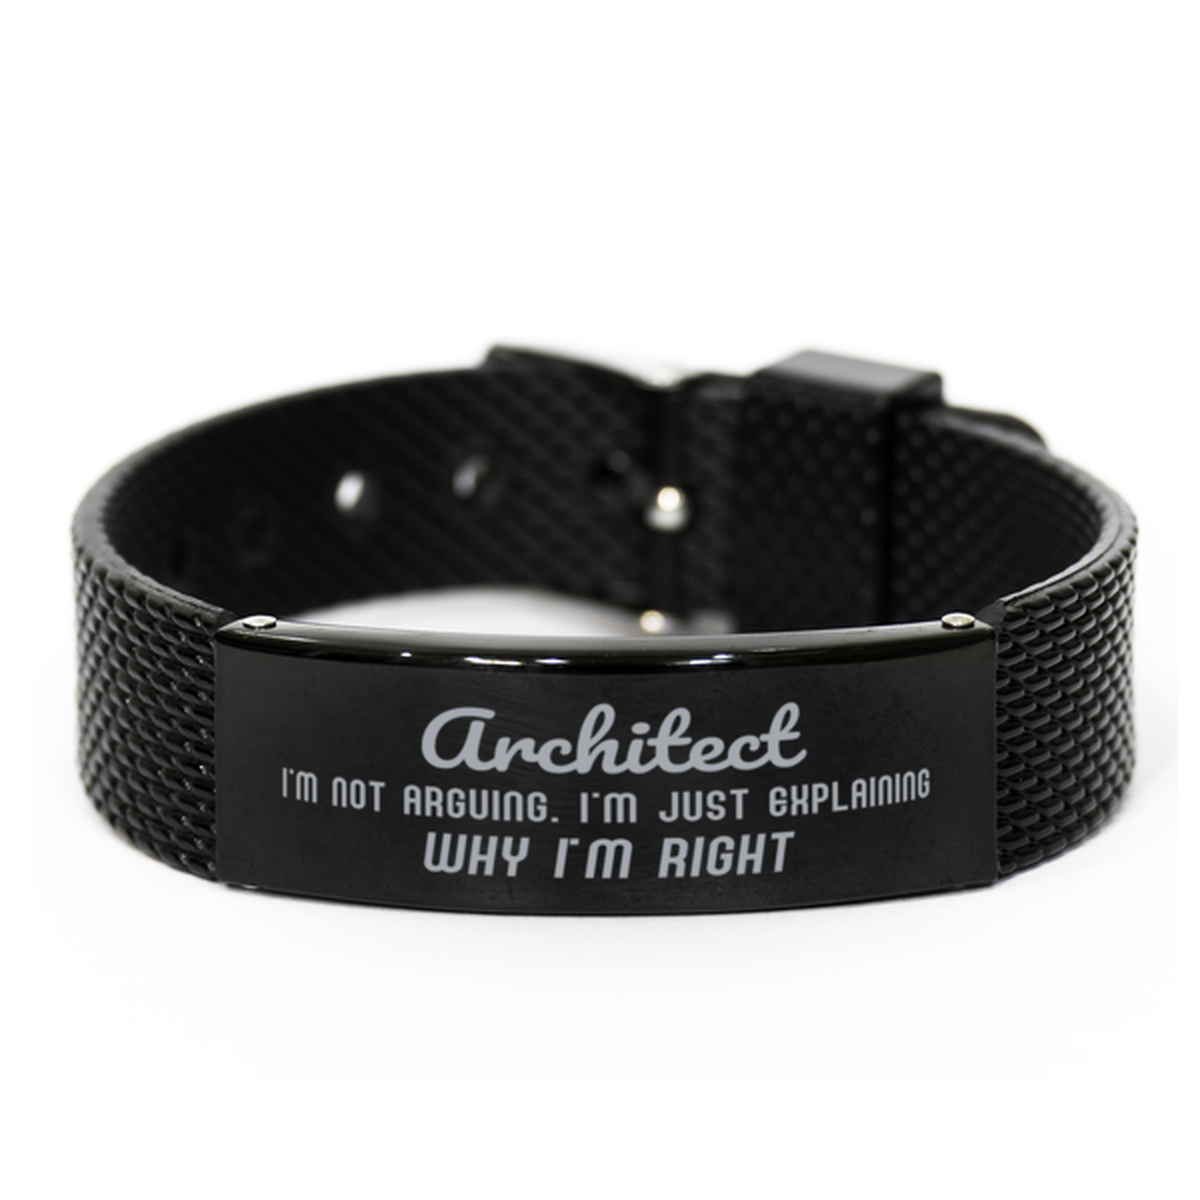 Architect I'm not Arguing. I'm Just Explaining Why I'm RIGHT Black Shark Mesh Bracelet, Funny Saying Quote Architect Gifts For Architect Graduation Birthday Christmas Gifts for Men Women Coworker